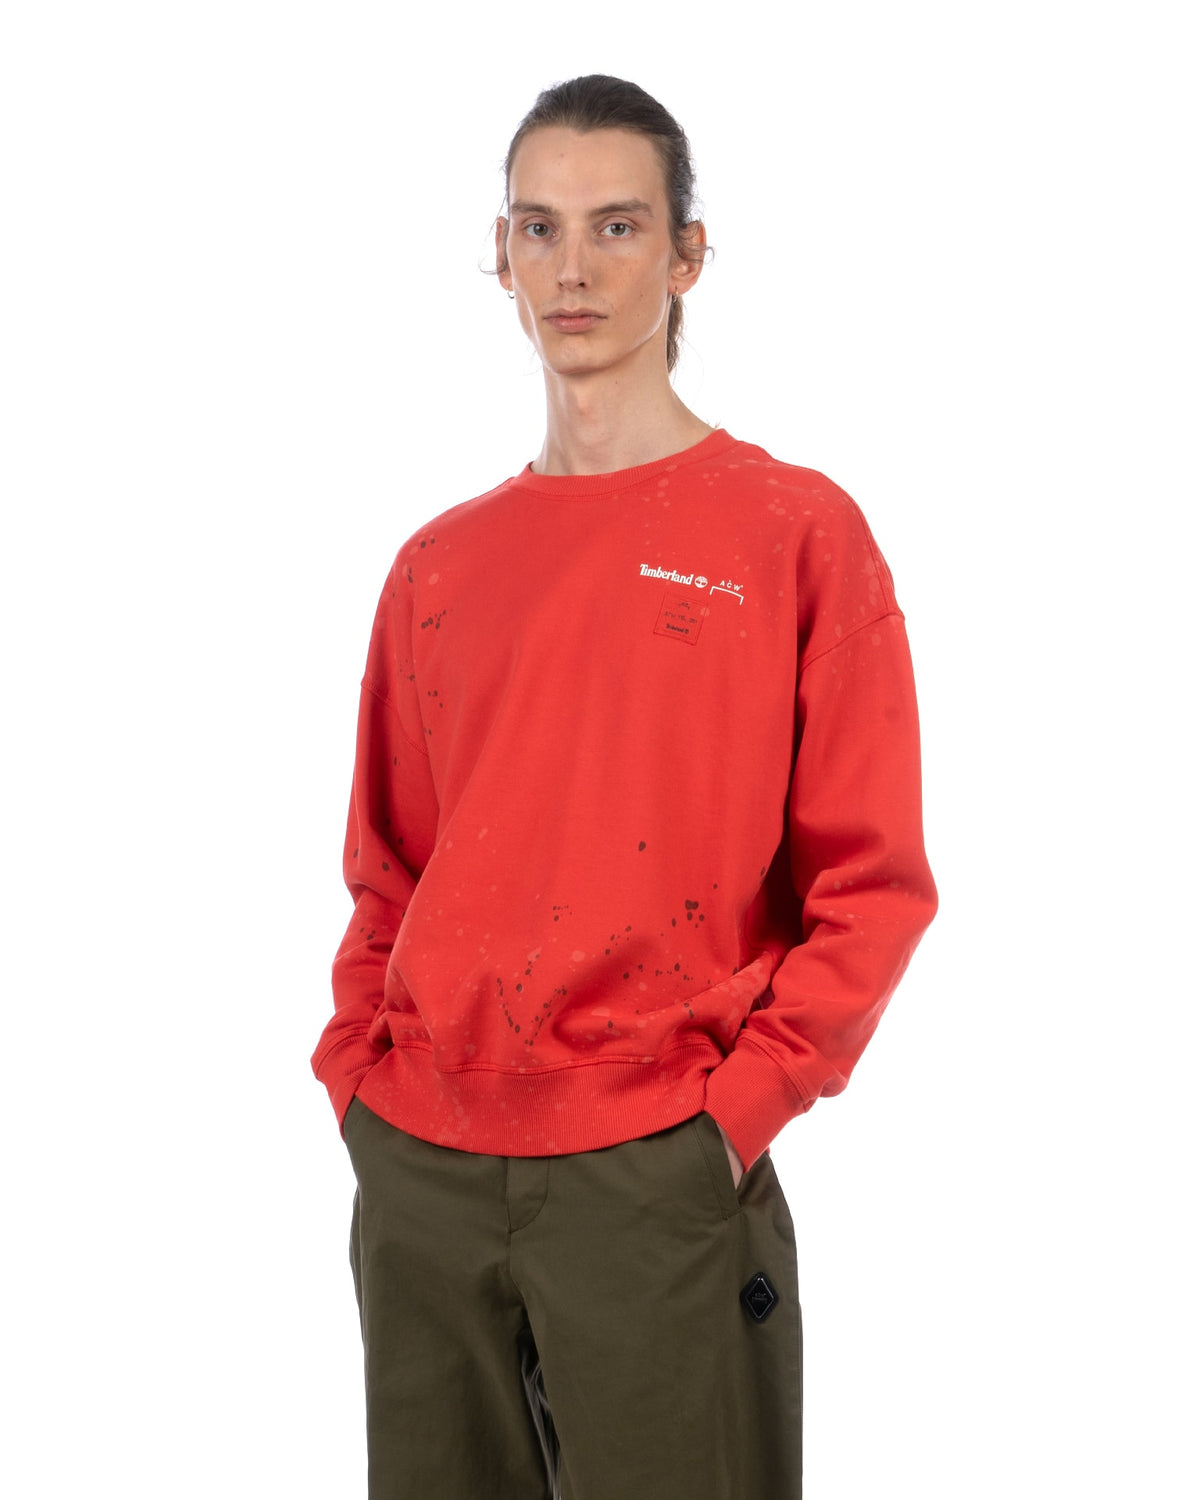 A-COLD-WALL* | x Timberland Crewneck Volt Red - Concrete